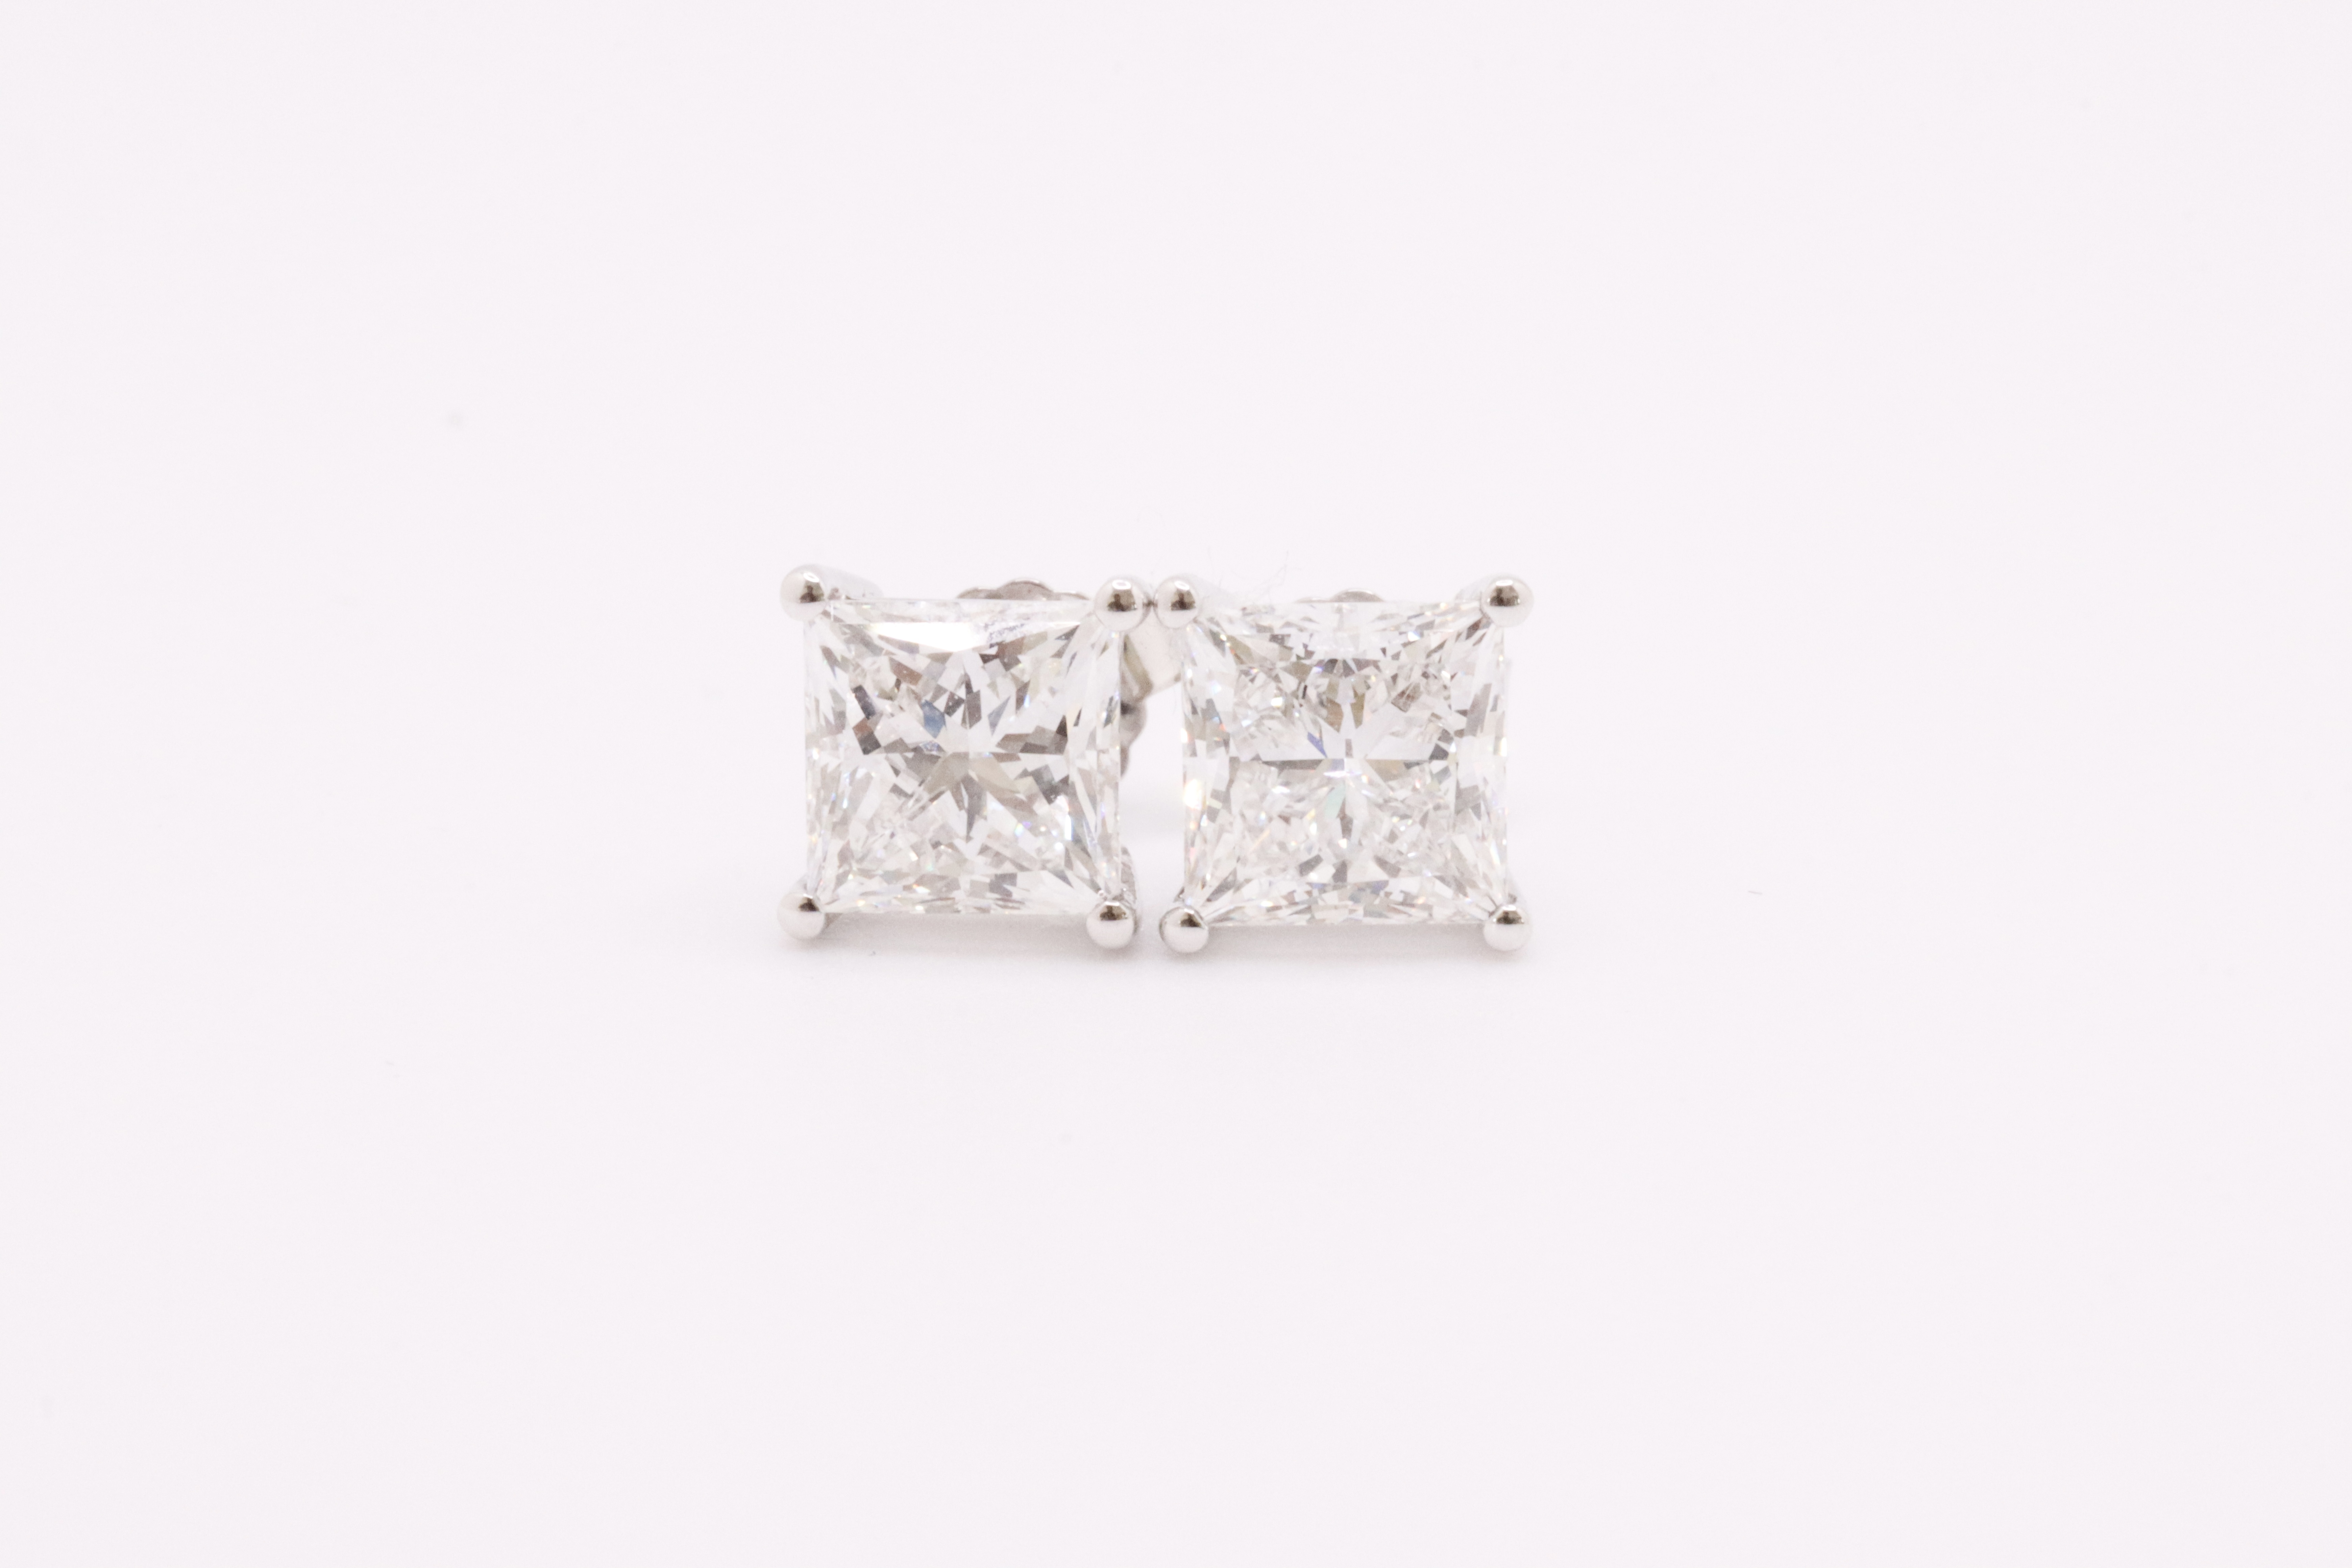 ** ON SALE ** Princess Cut 5.00 Carat Diamond Earrings Set in 18kt White Gold - F Colour SI Clarity - Image 2 of 5